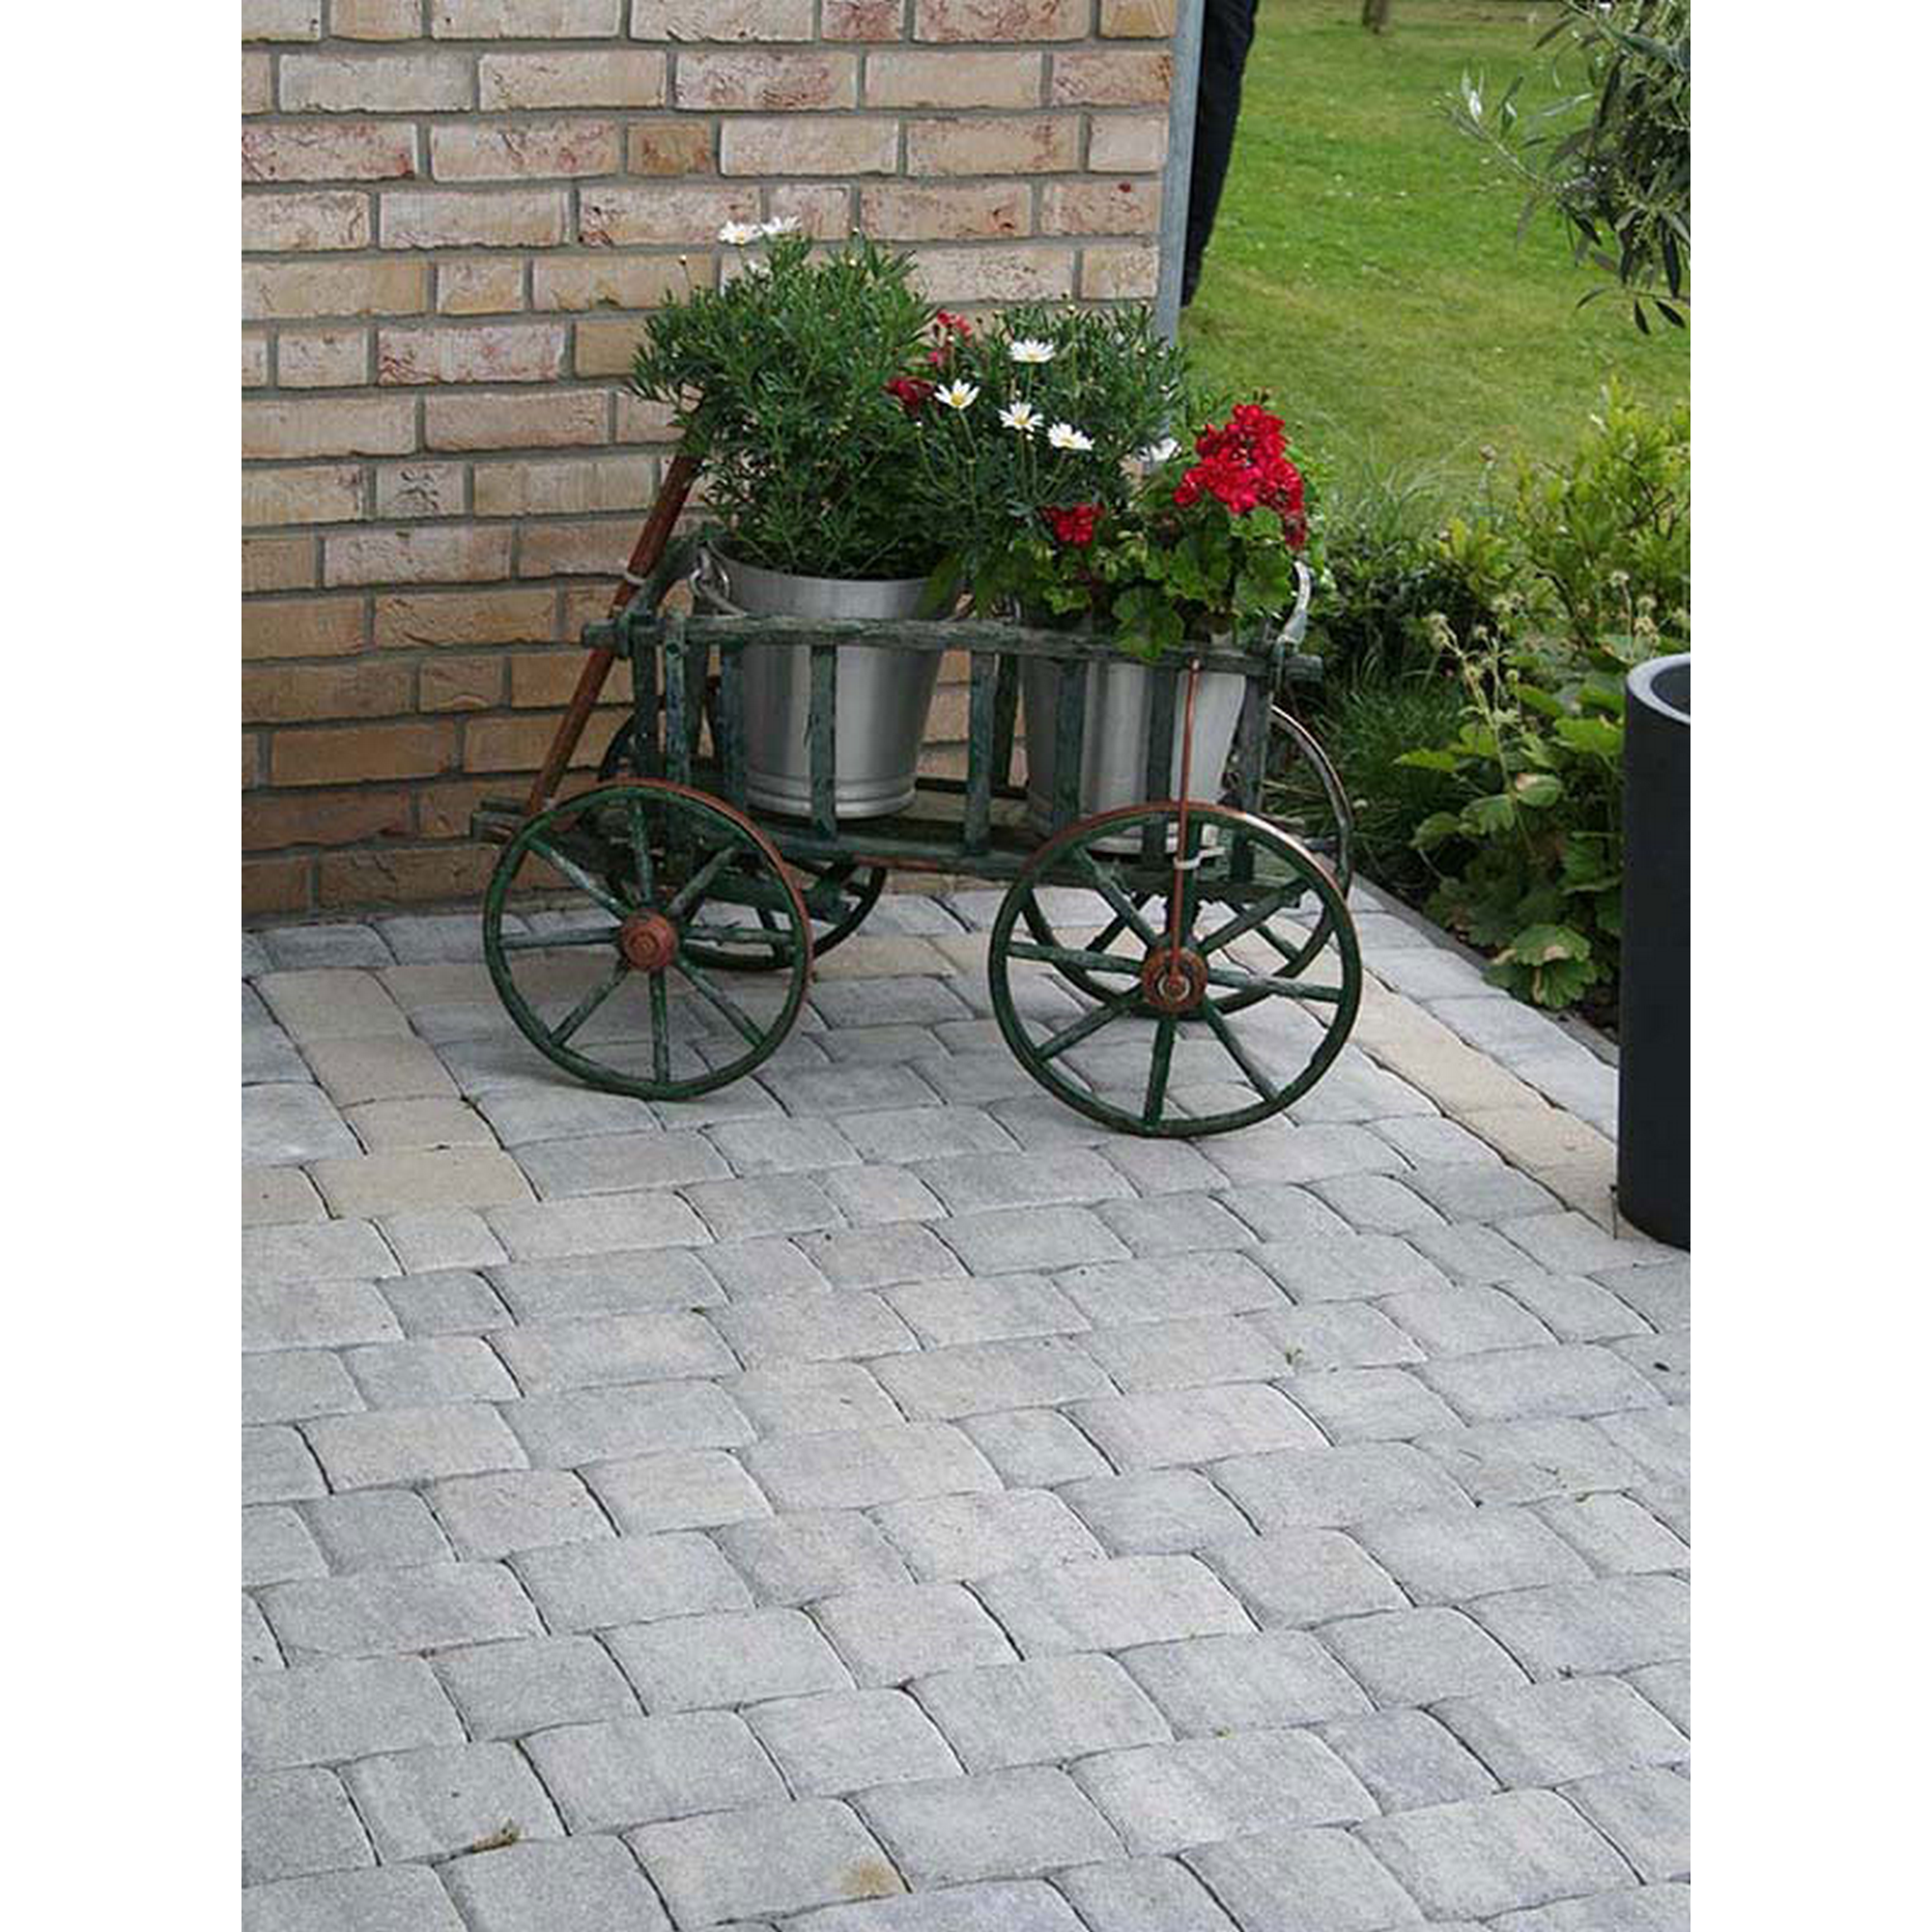 Antikpflaster 'Country' Beton quarzit 121 x 83 x 6 cm + product picture